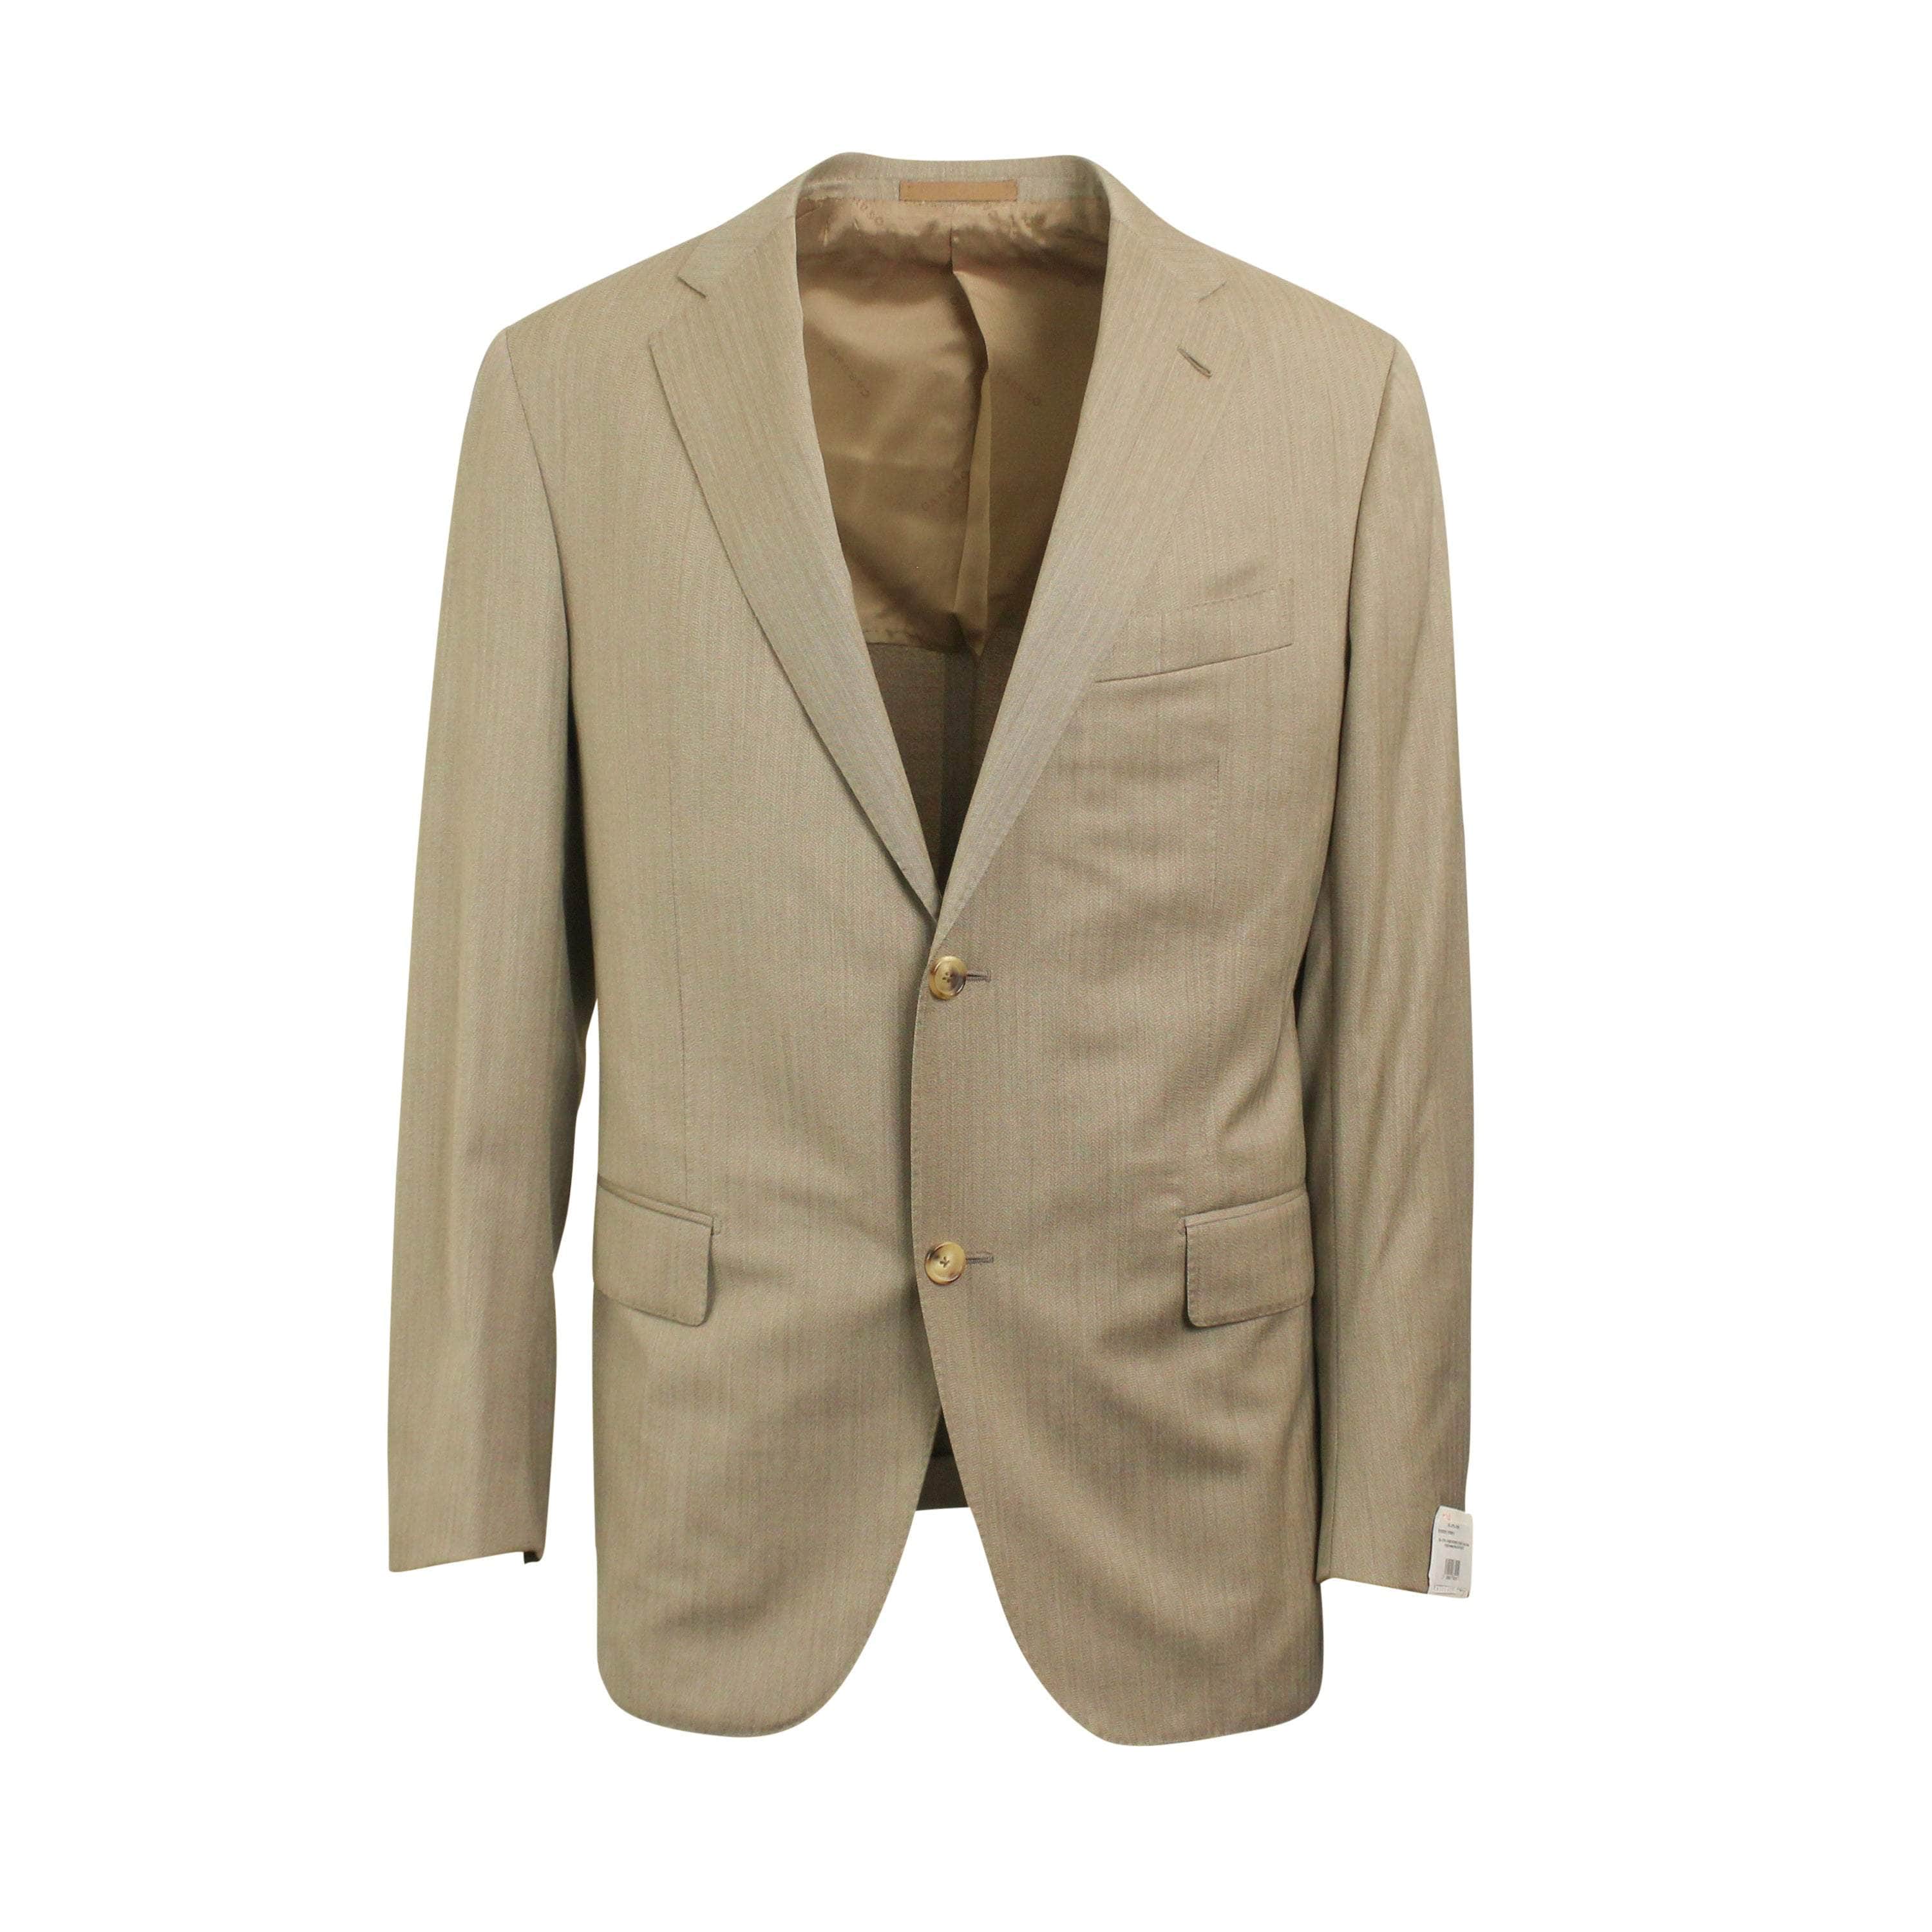 Caruso 500-750, caruso, channelenable-all, chicmi, couponcollection, main-clothing, shop375, size-50, Stadium Goods, stadiumgoods 50 Single Breasted Sand Striped Suit CRS-XTPS-0156/50 CRS-XTPS-0156/50